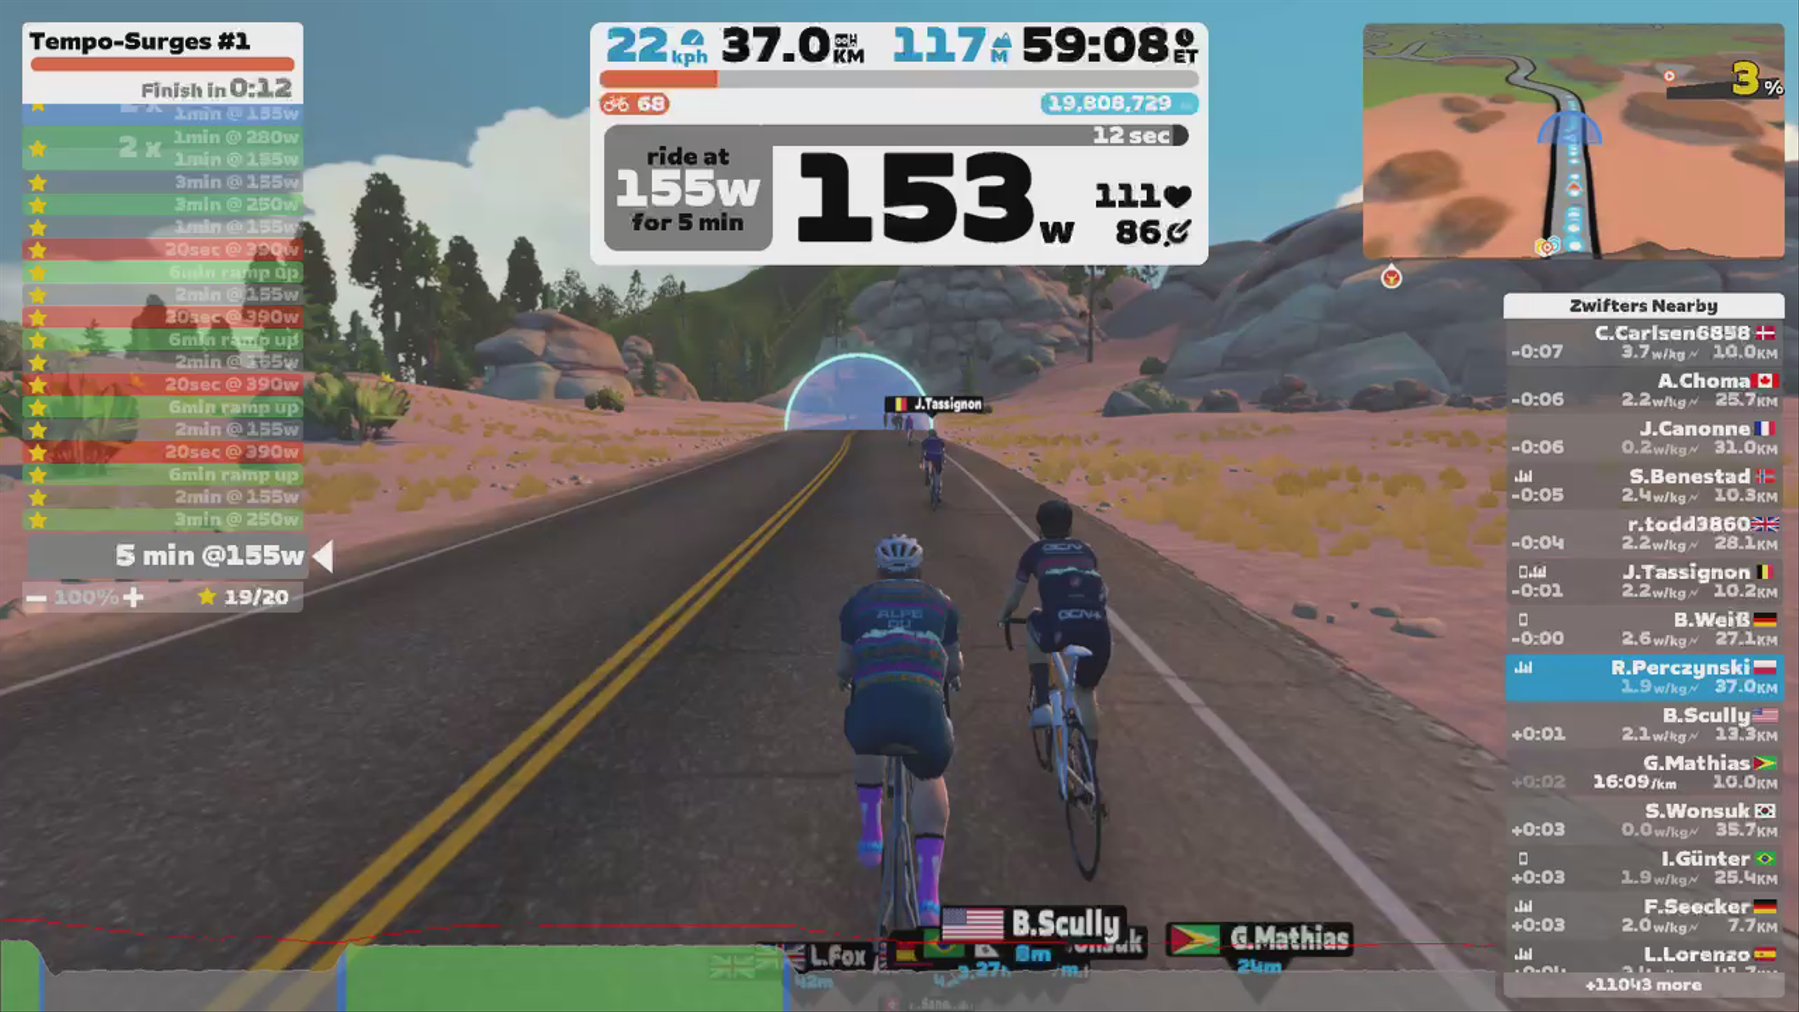 Zwift - Tempo-Surges #1 in Watopia